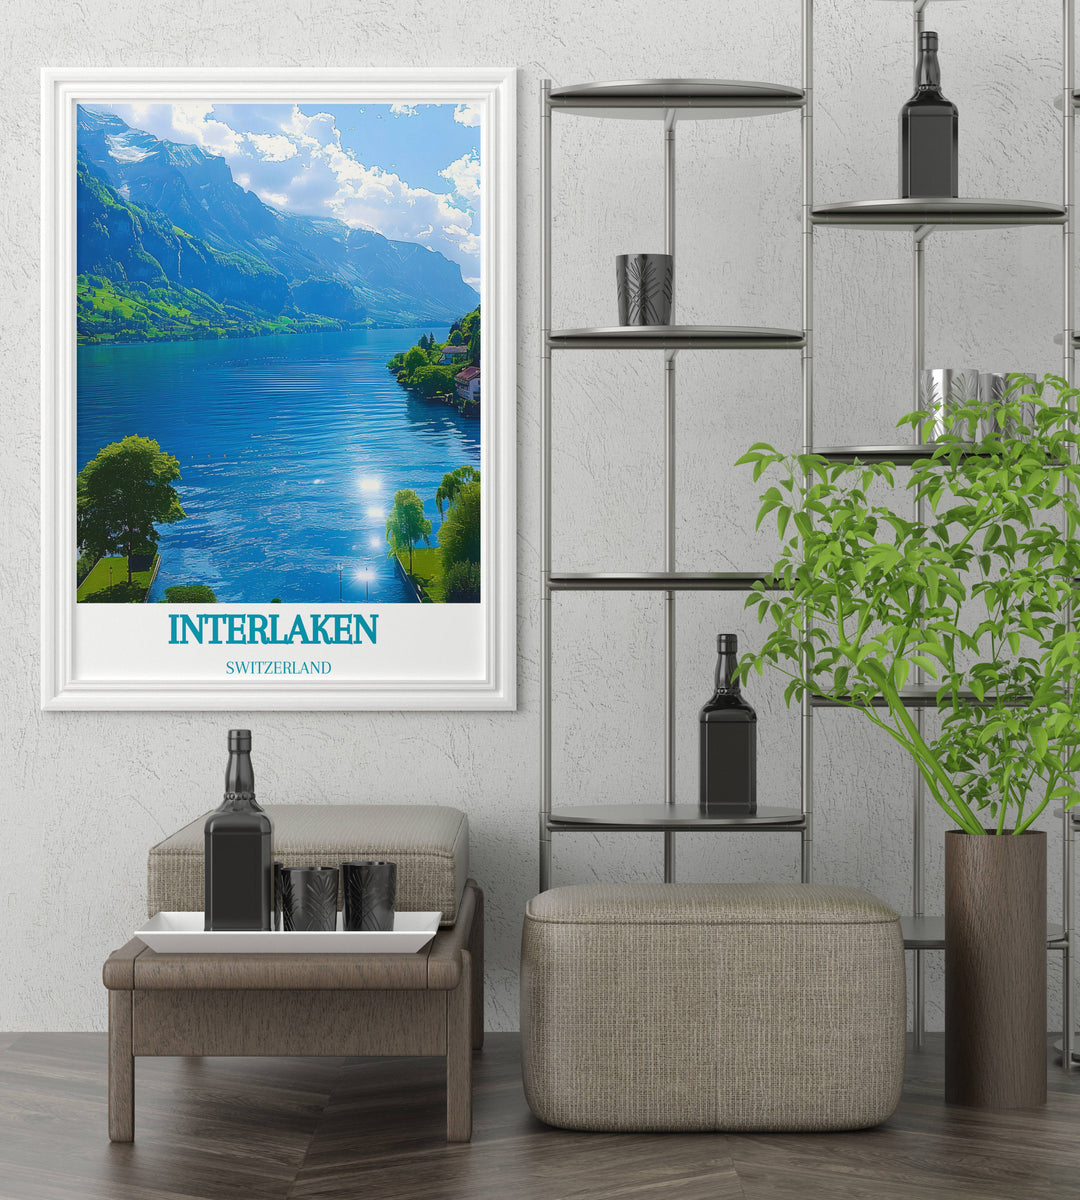 Swiss Alps poster showcasing majestic peaks of Jungfrau Eiger and Monch in a panoramic landscape view